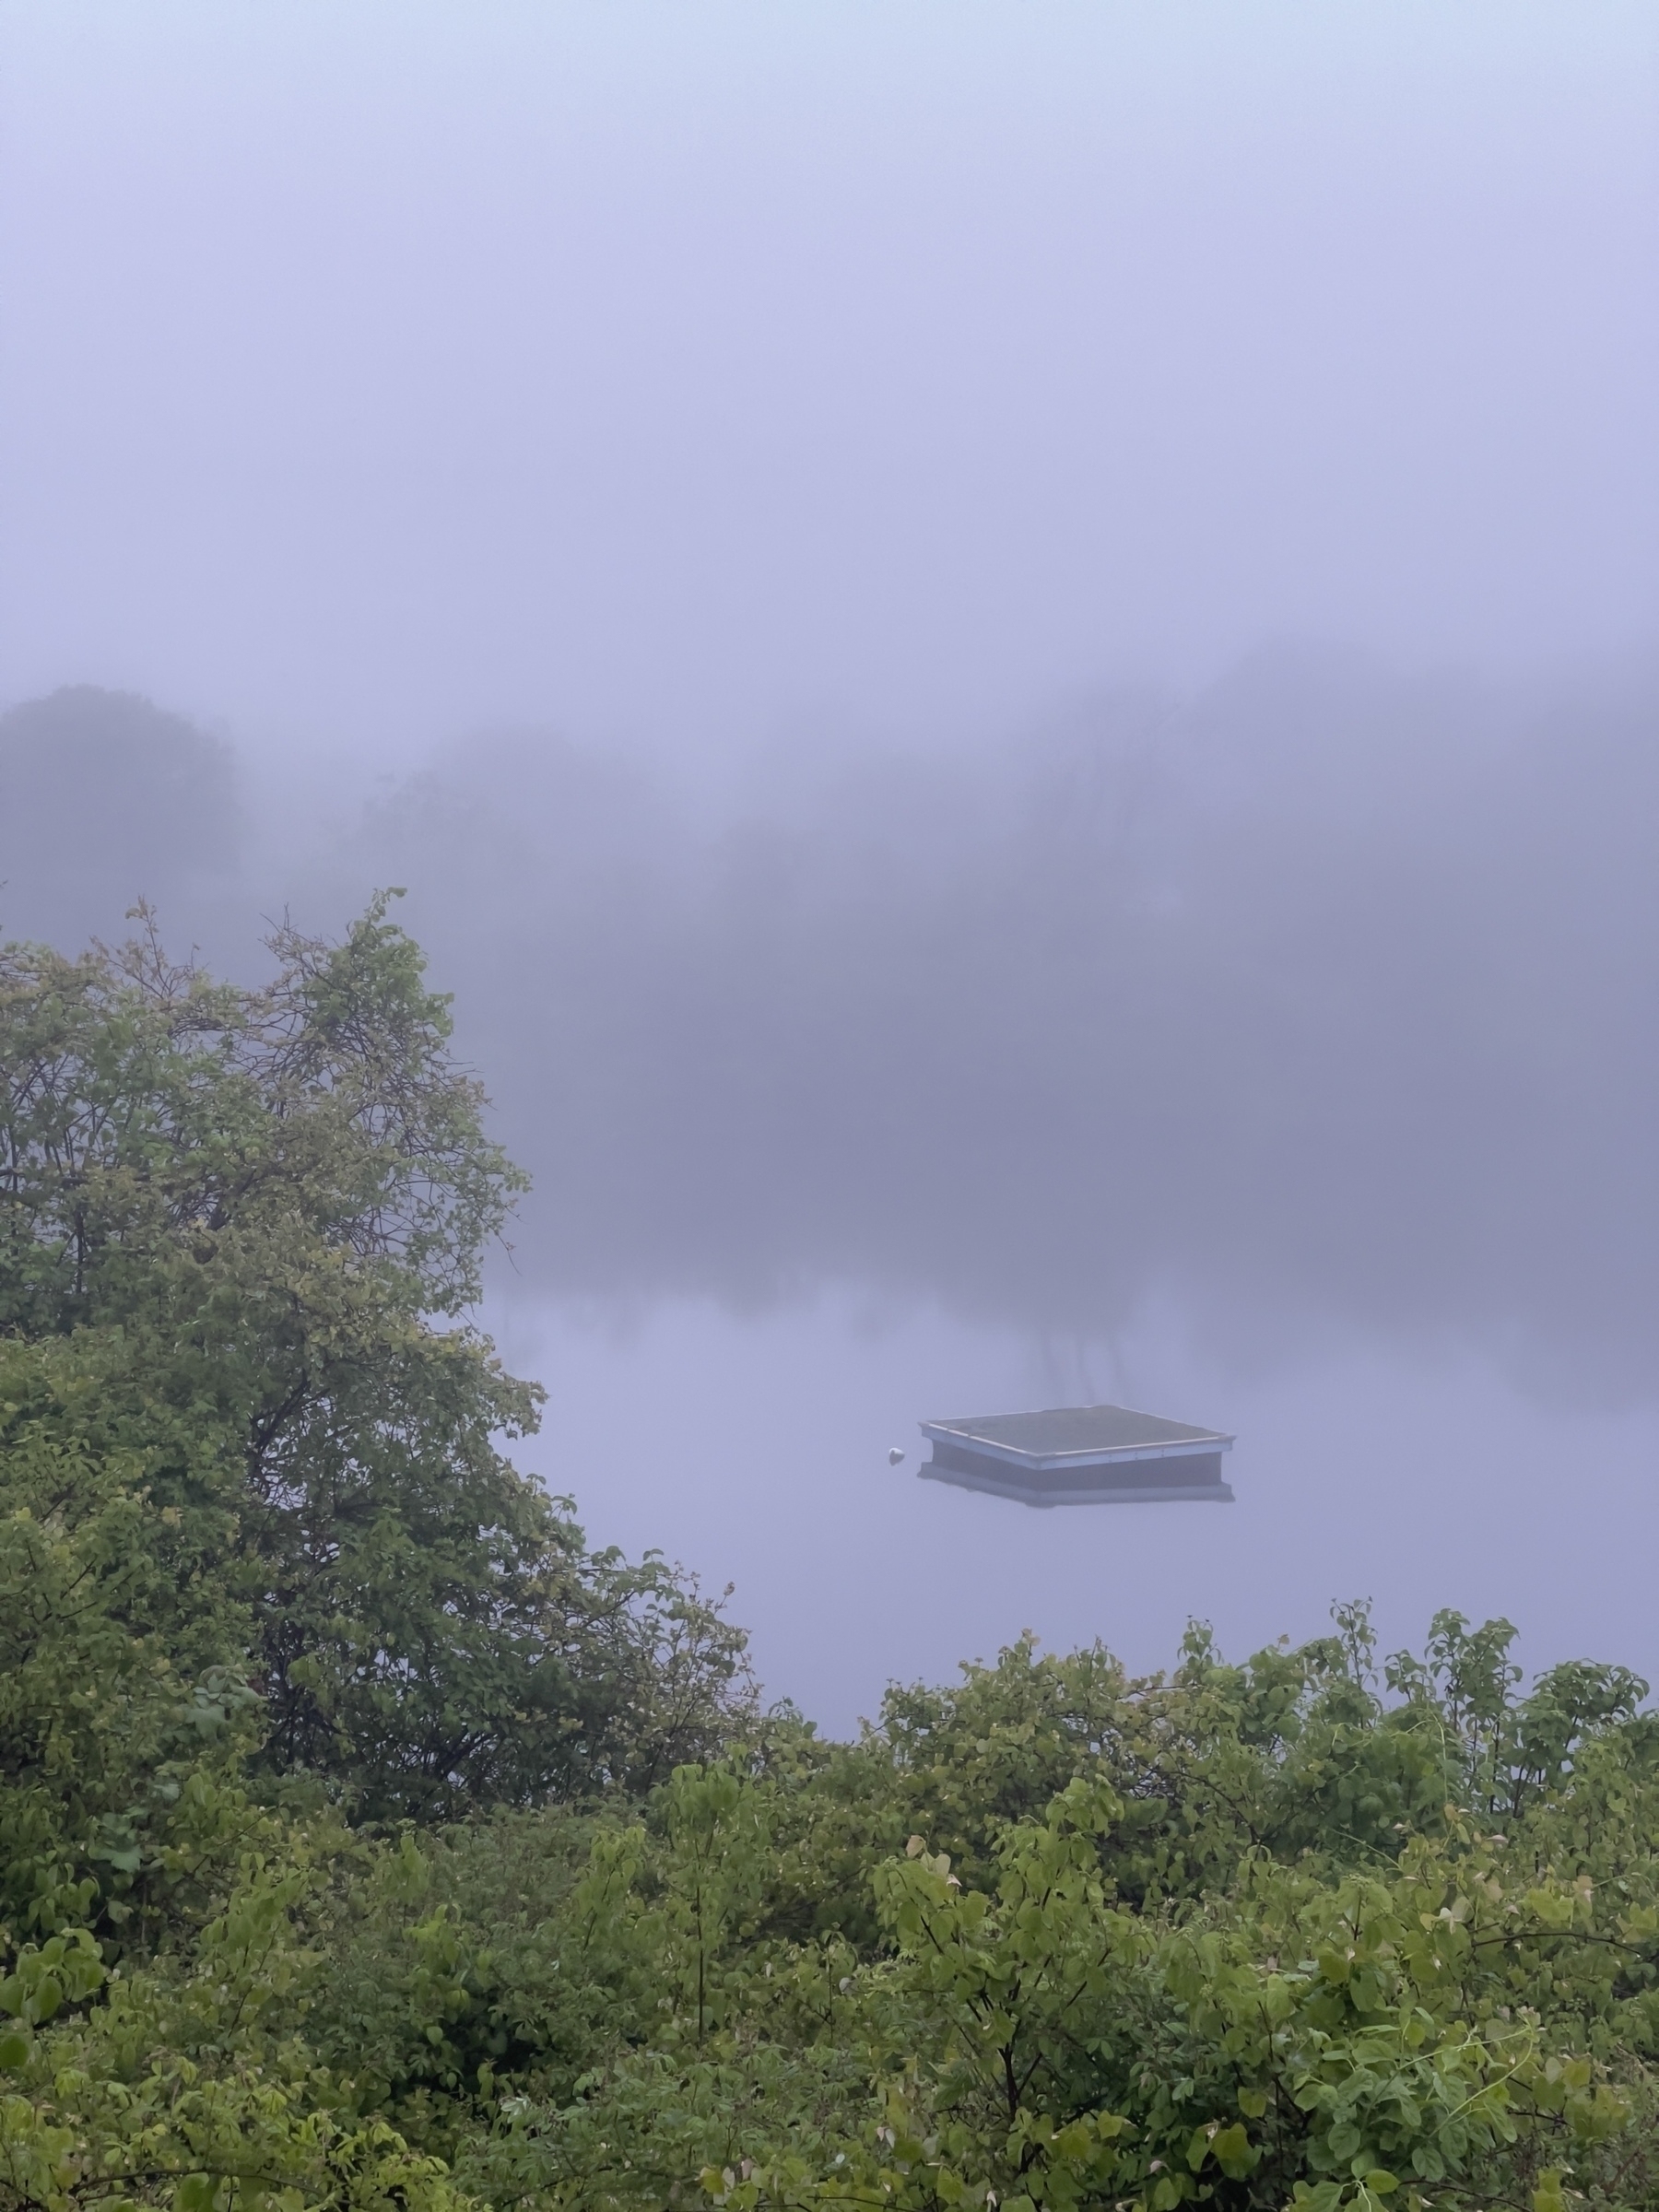 Floating platform in a pond with shrubs in the foreground and fog shrouded landscape in the background.